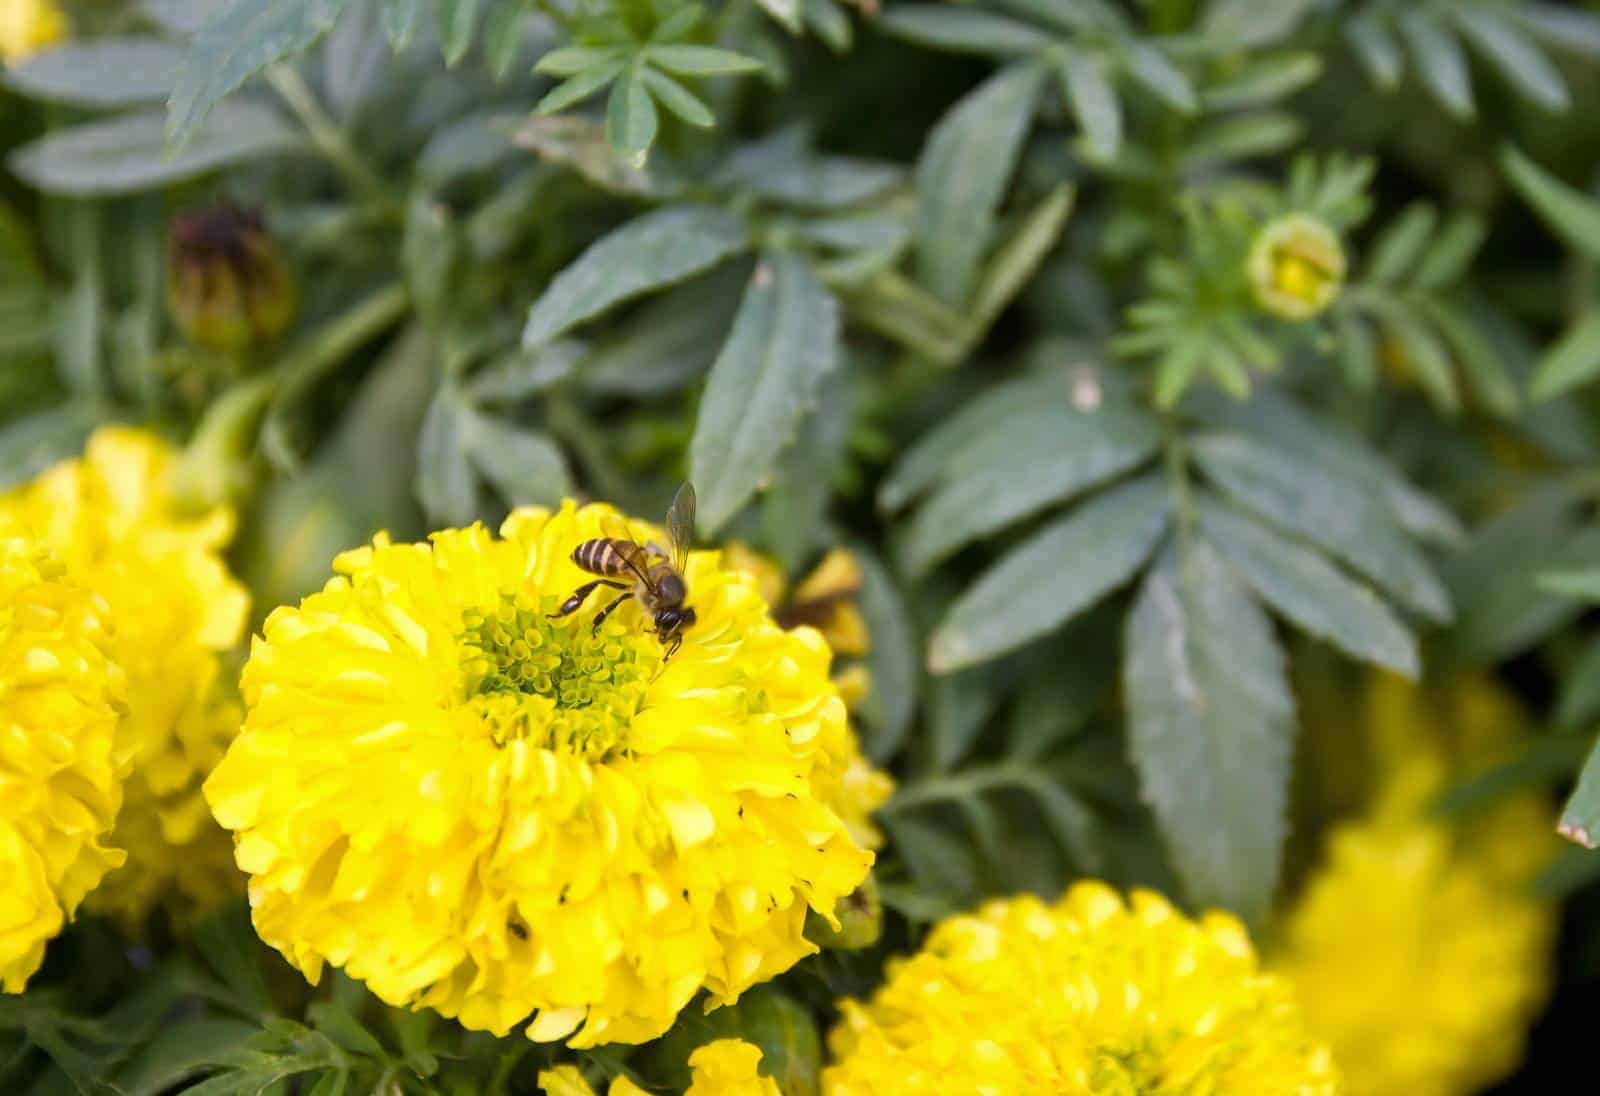 Are bees attracted to Marigolds?